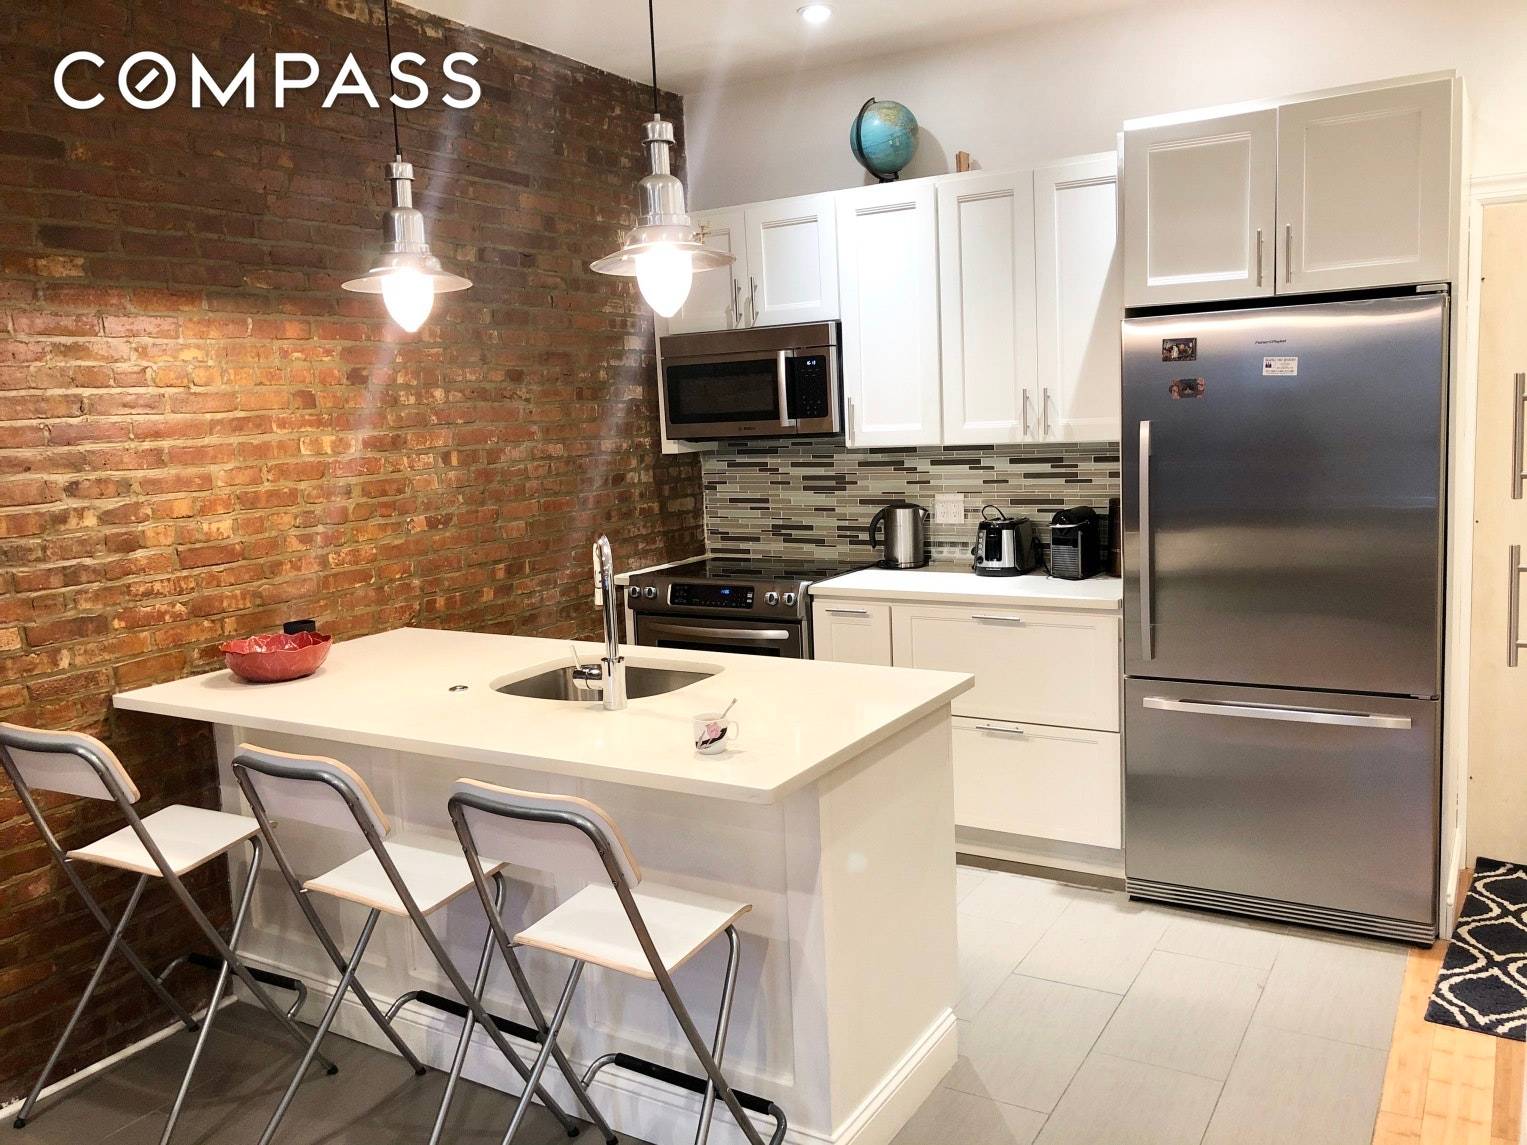 Stunning 1br Fully Furnished in one of the most elegant Brownstone blocks of Long Island City.